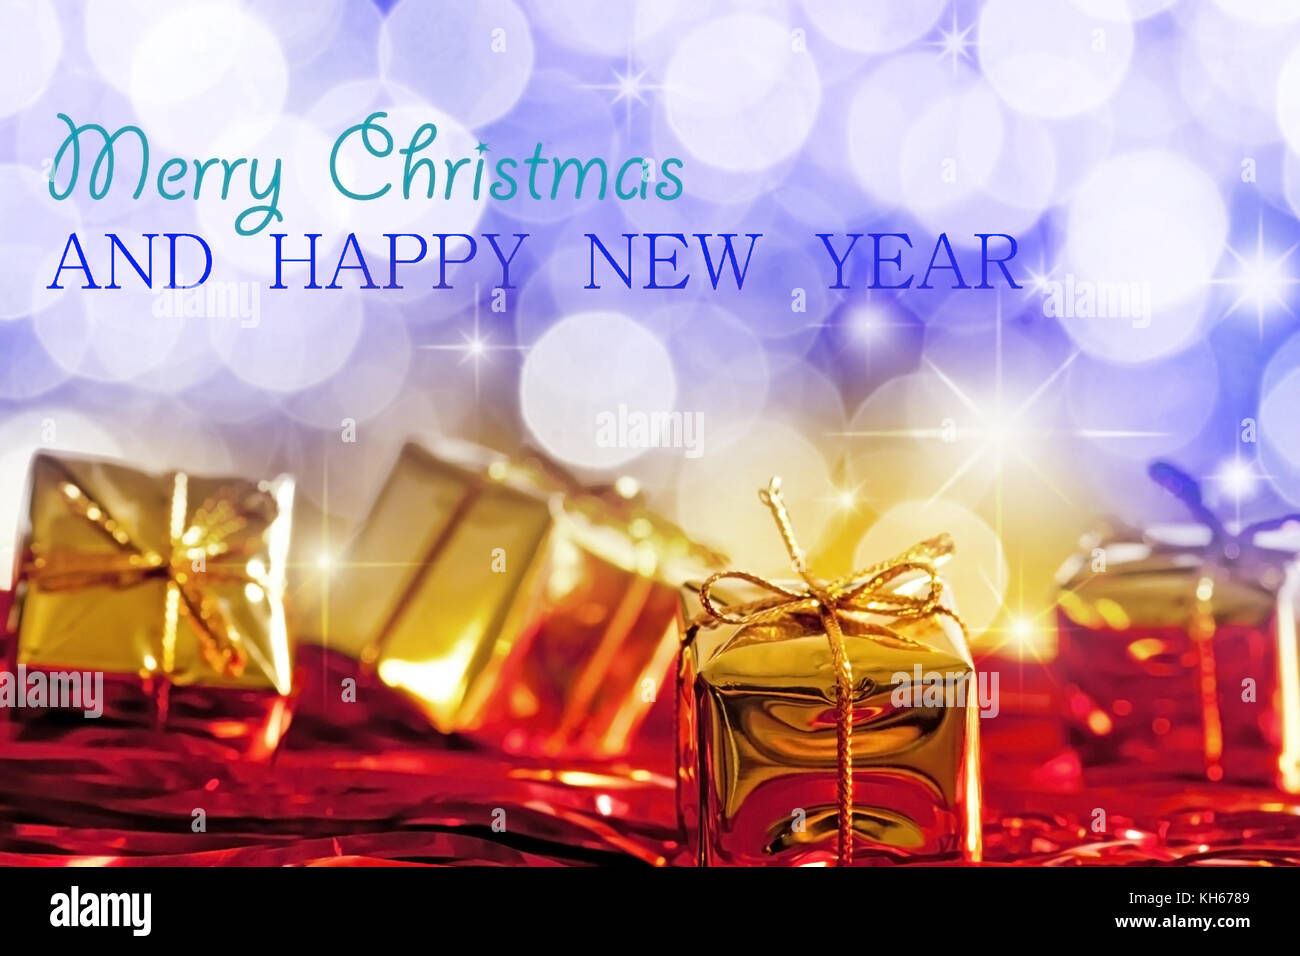 Christmas and New Year Greetings Card with Christmas Present Stock Photo